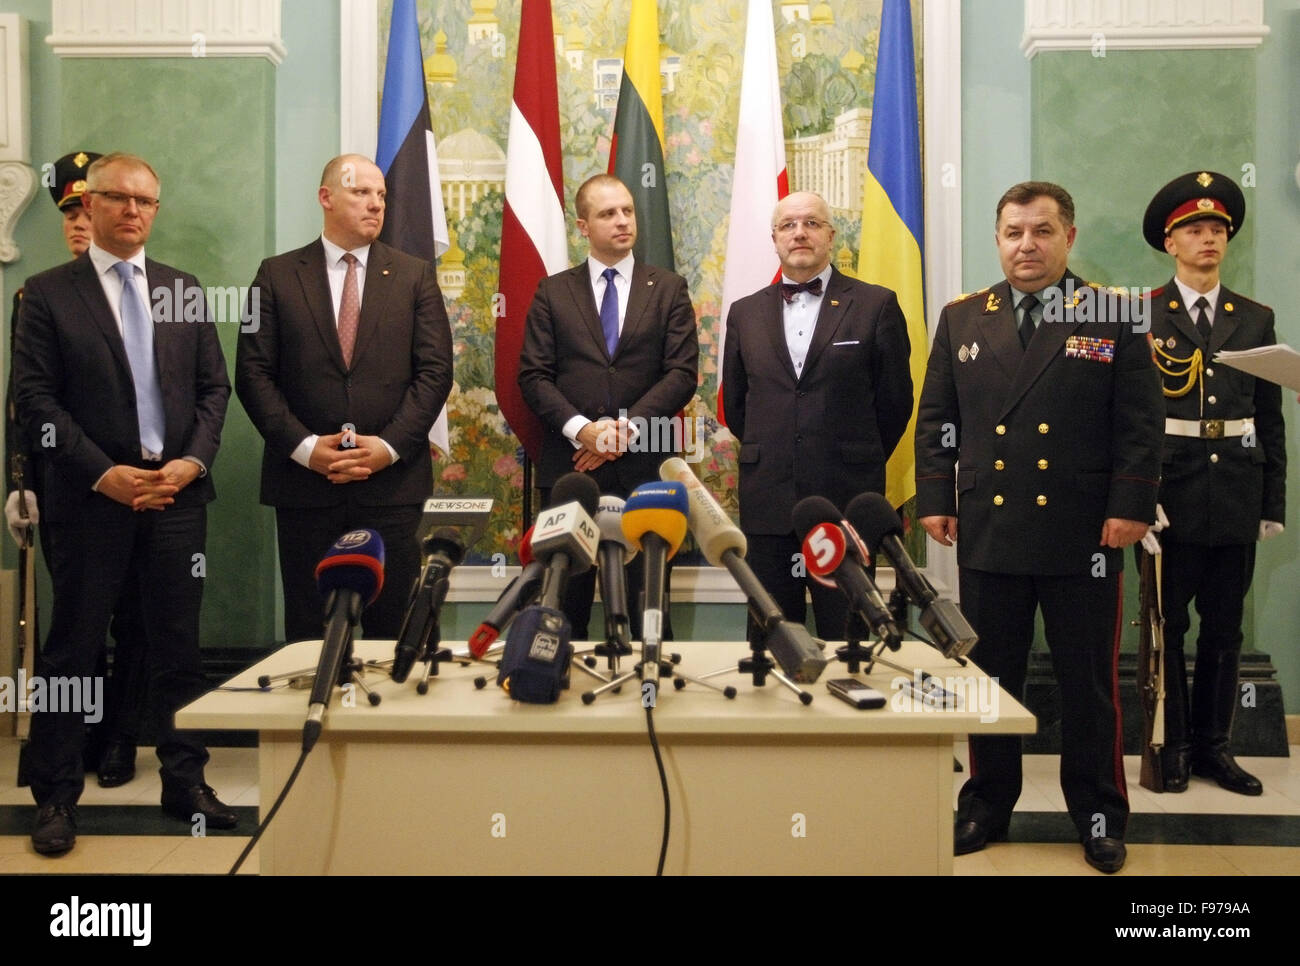 Kiev, Ukraine. 14th Dec, 2015. From left to right: Estonian Defence Minister Hannes Hanso, Latvian Defence Minister Raimonds Bergmanis, Polish Deputy Defence Minister Tomasz Szatkowski, Lithuanian Defence Minister Juozas Olekas and Ukrainian Defence Minister Stepan Poltorak speaks with the media after the signing of the Joint Statement of the Ministers of Defence of Ukraine, Poland, Estonia, Latvia, and Lithuania on the basis of the joint working meeting on the development of cooperation in the defense sphere. © Vasyl Shevchenko/Pacific Press/Alamy Live News Stock Photo